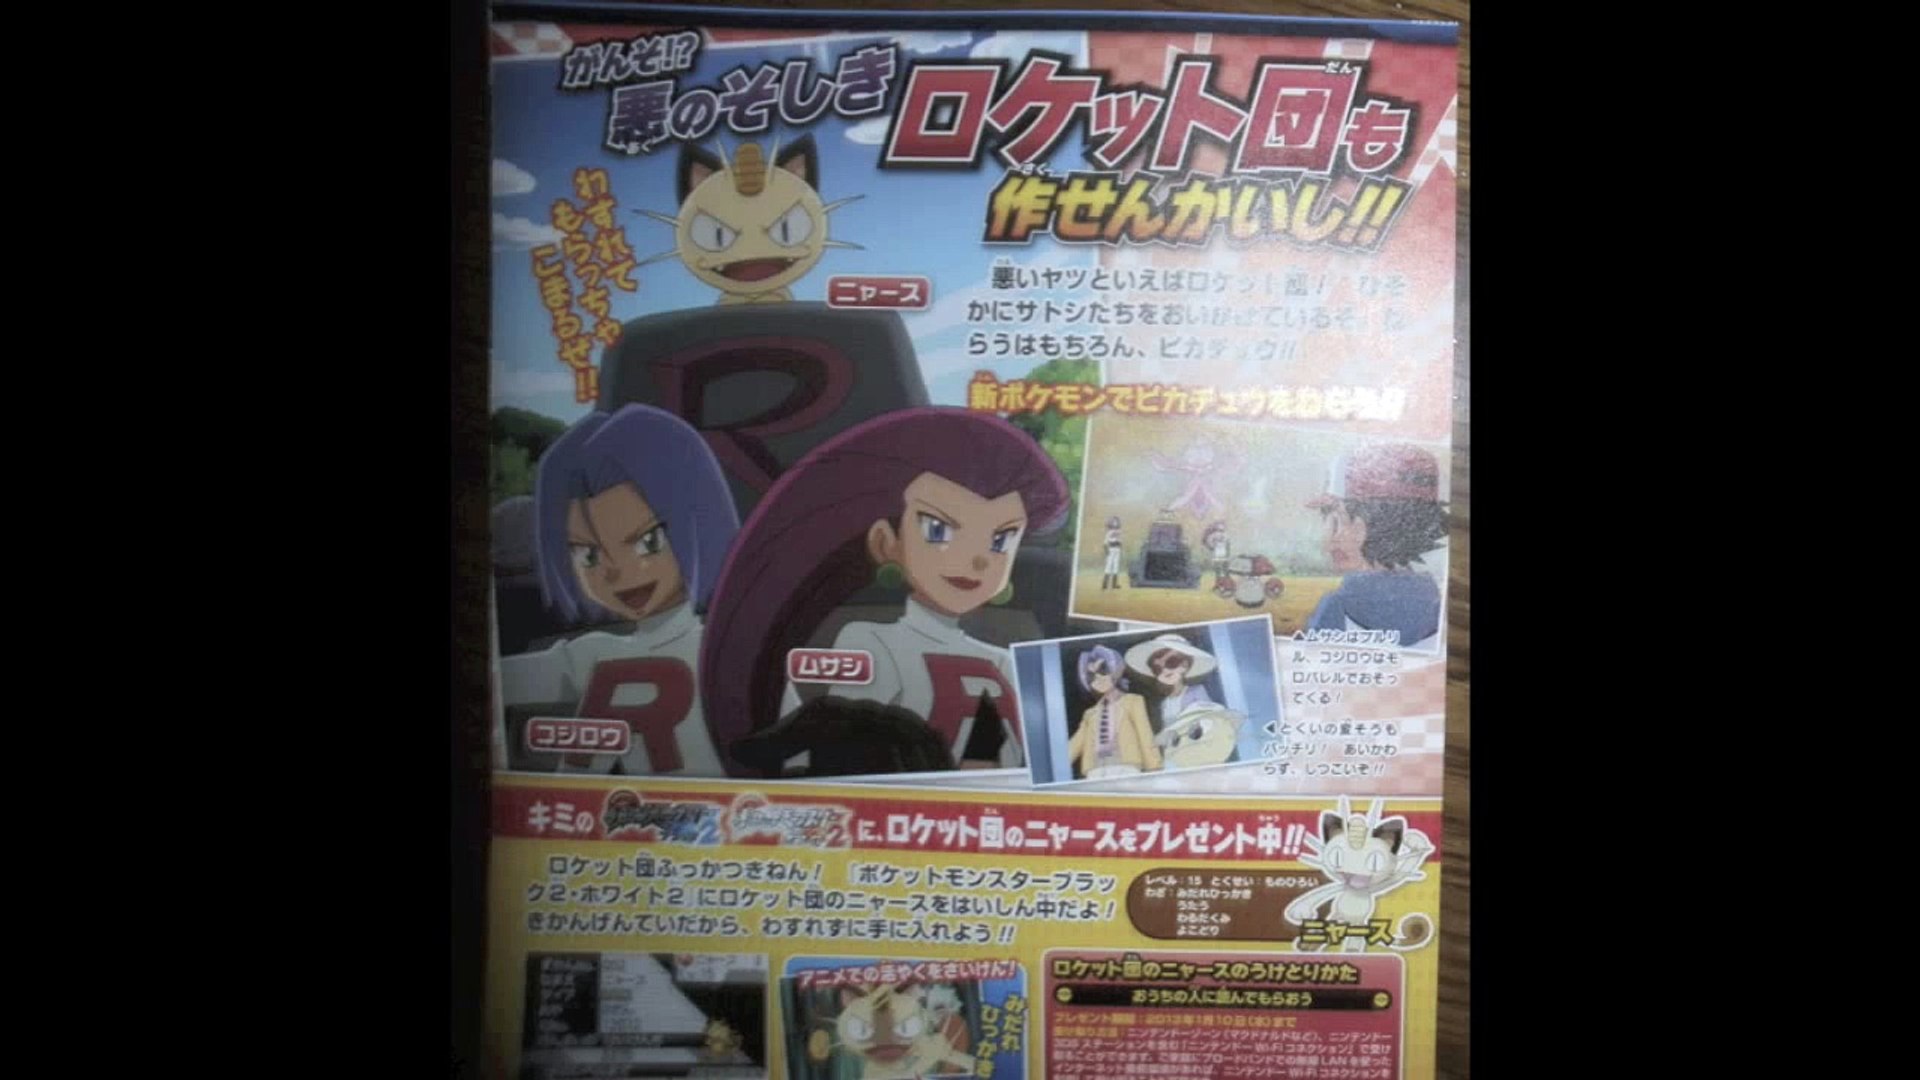 Pokemon Best Wishes 2 Episode N Episode 111 And 112 New Screenshots Including Looker Mp4 Video Dailymotion